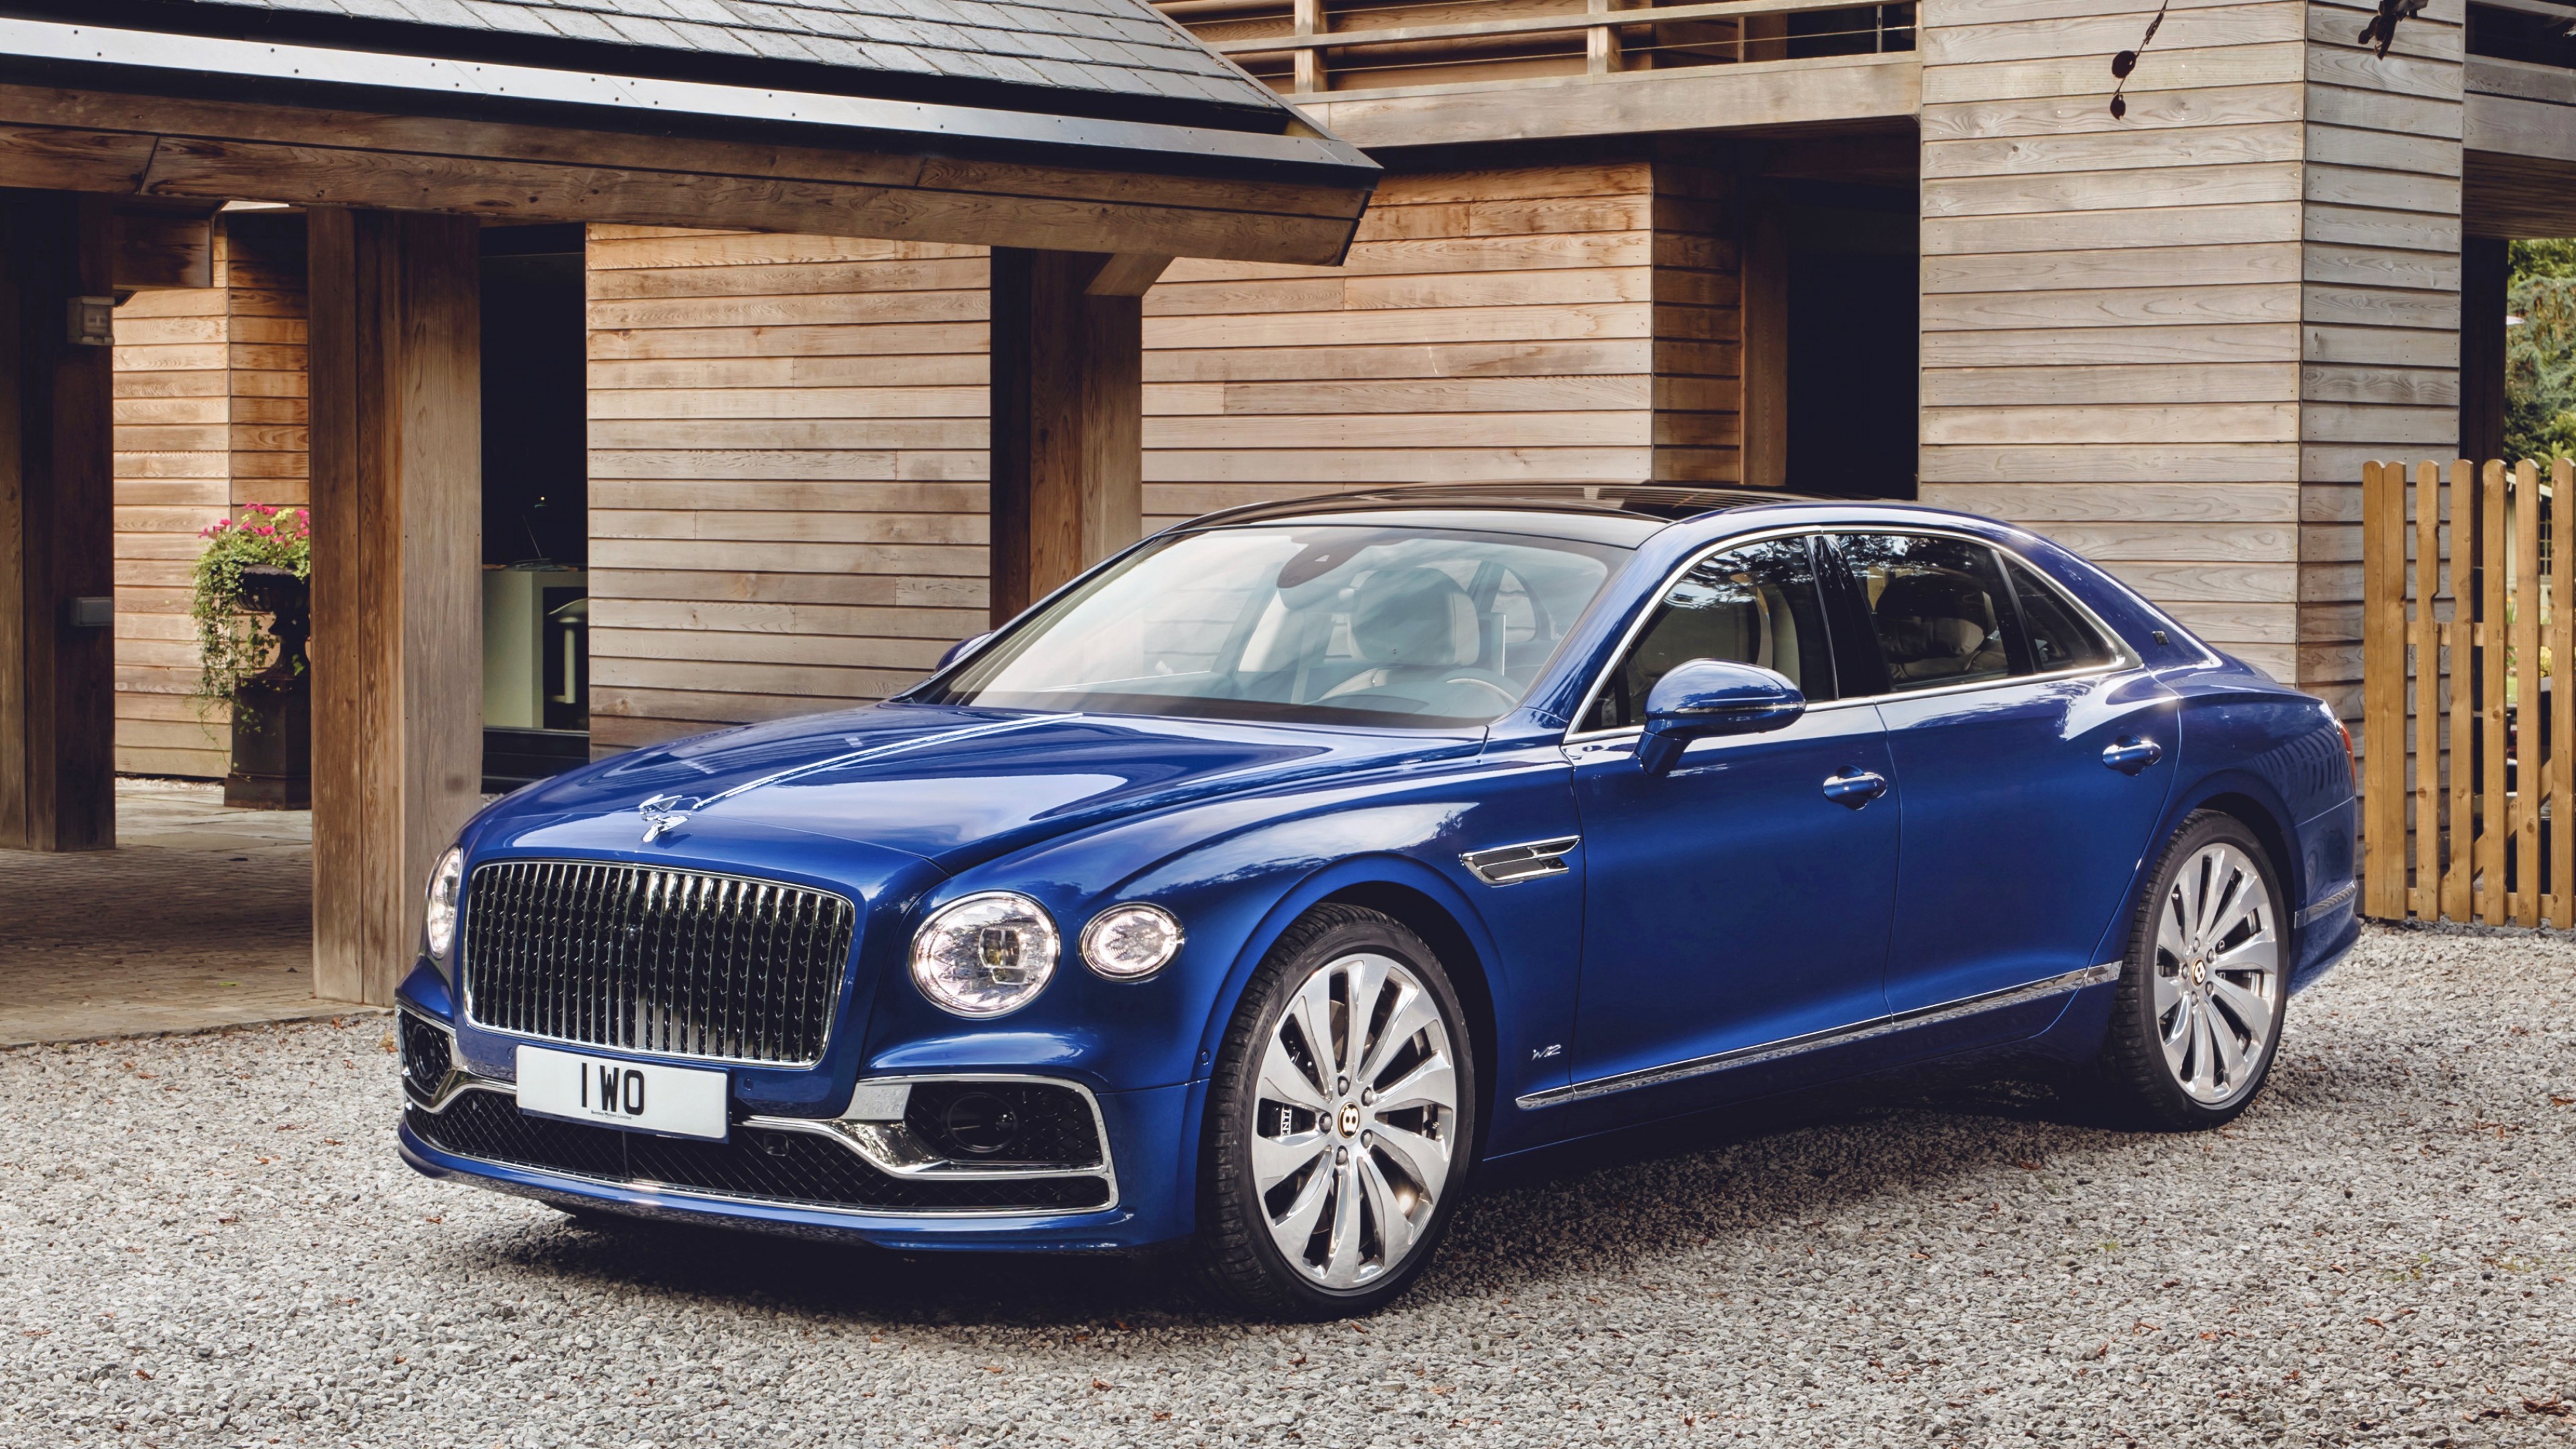 Bentley Flying Spur exterior restyling